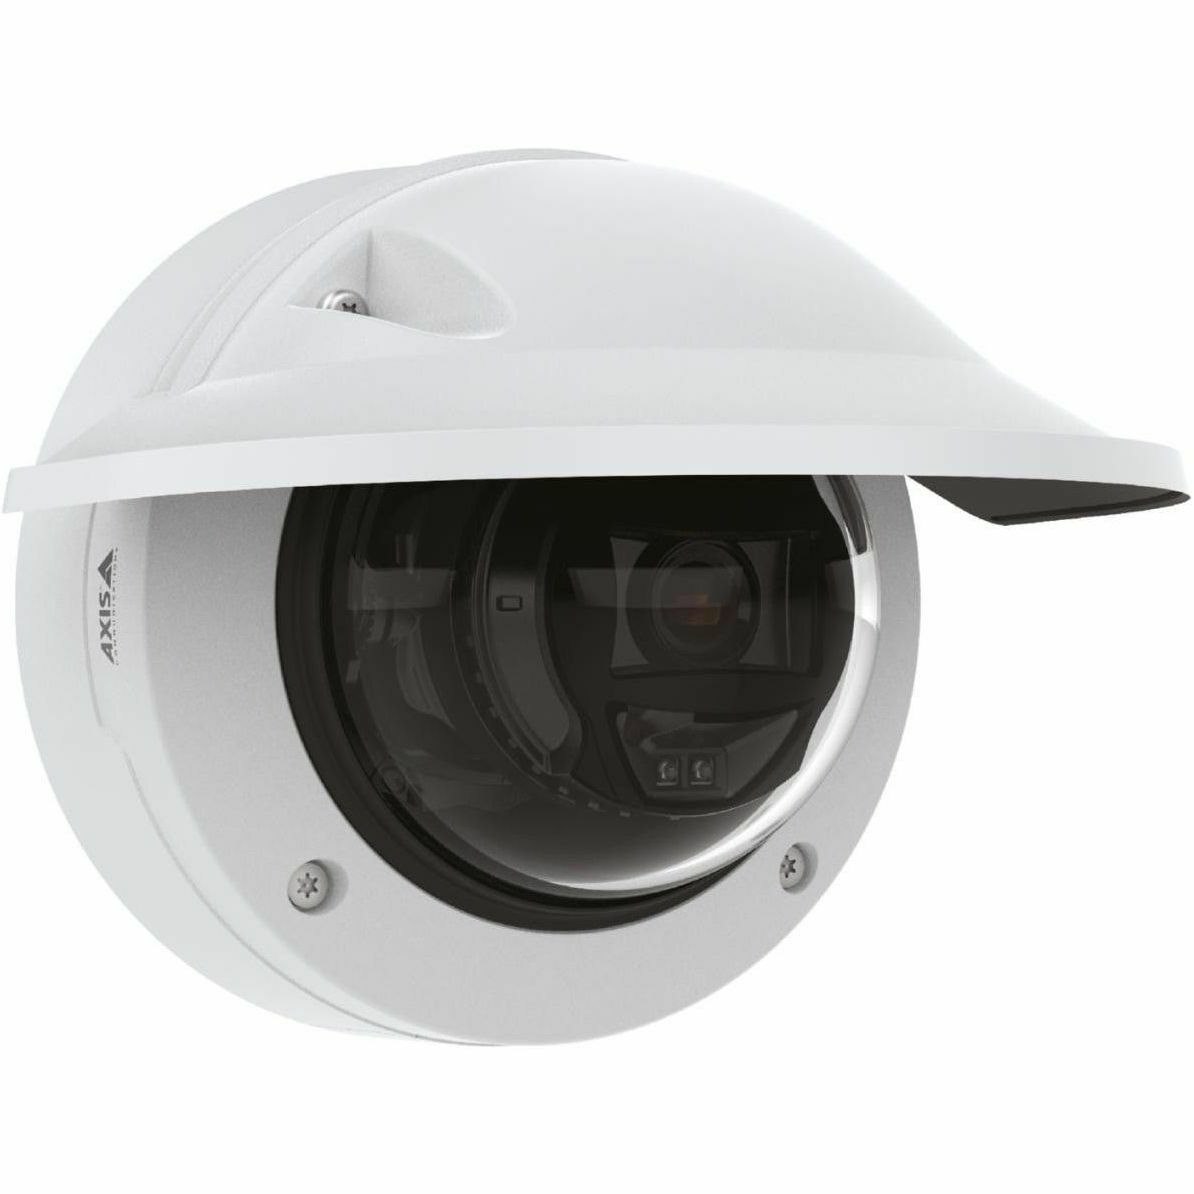 AXIS P3265-LVE-3 2 Megapixel Outdoor Full HD Network Camera - Color - Dome - White - TAA Compliant